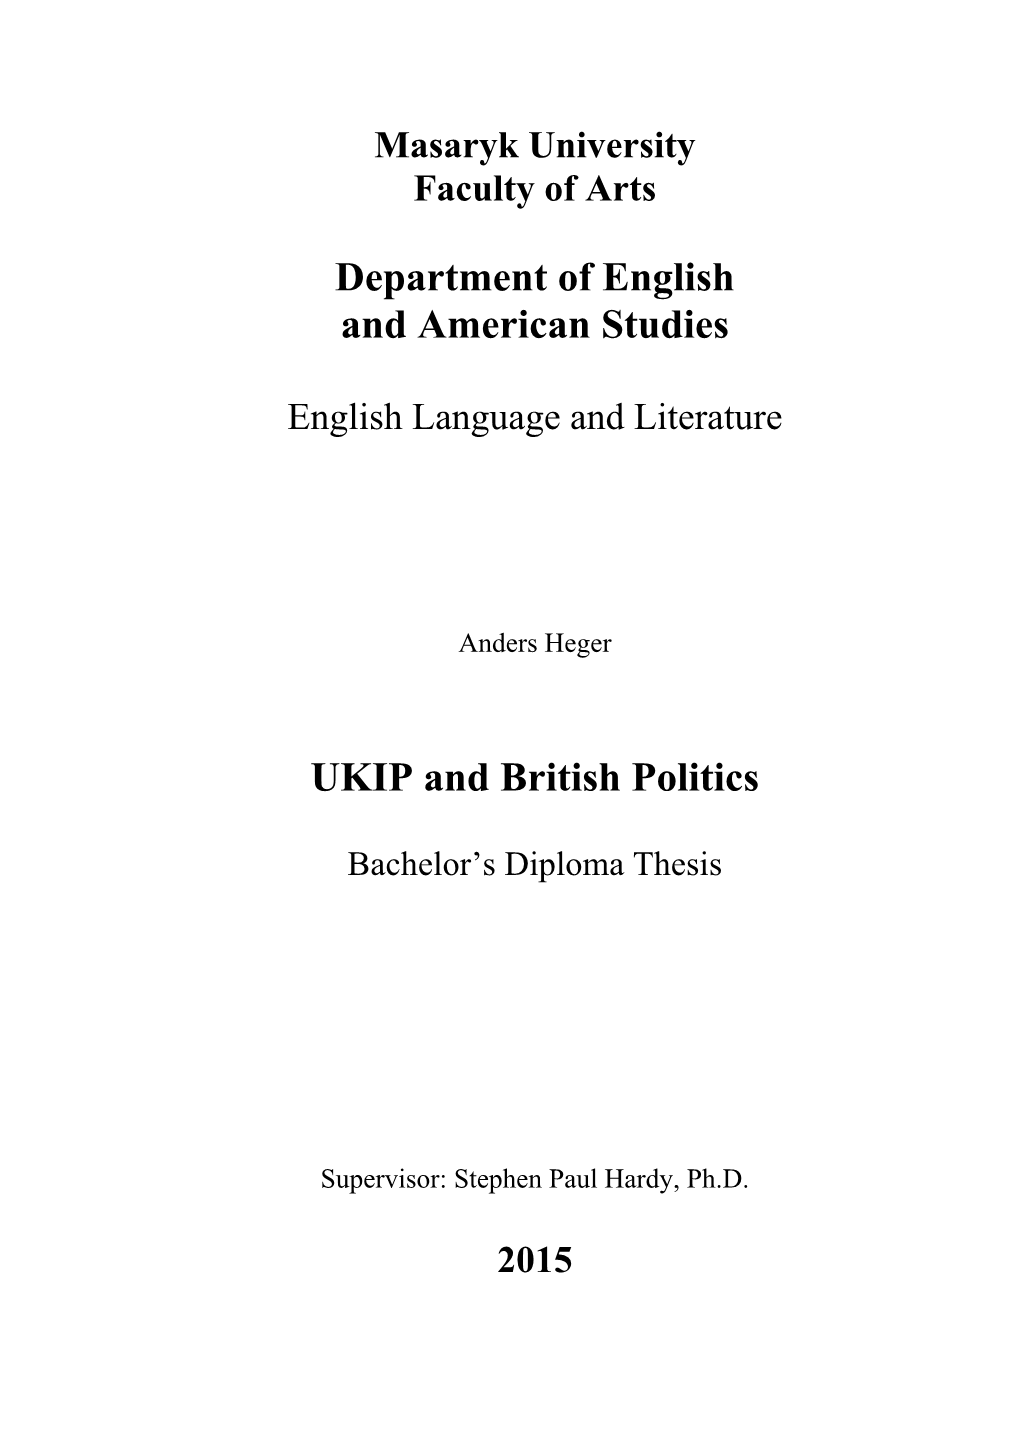 Department of English and American Studies UKIP And